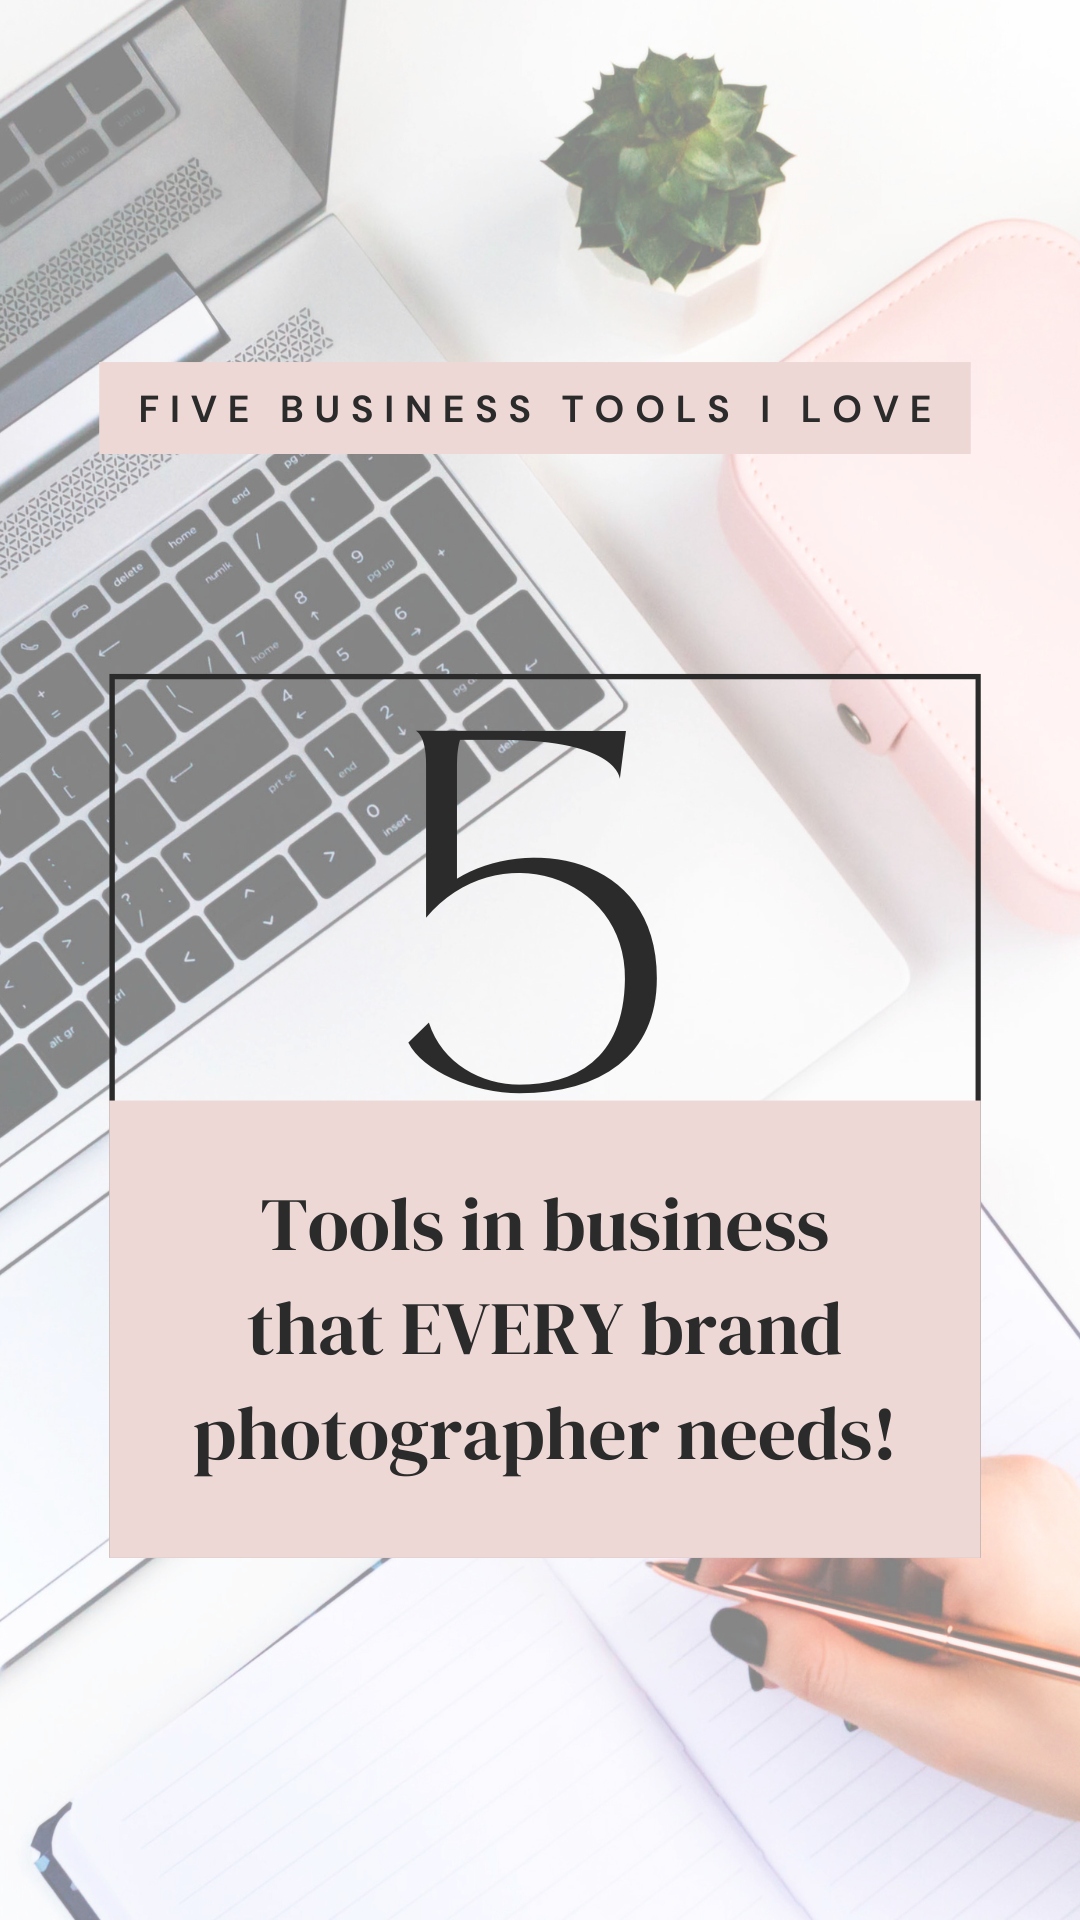 Five top tools you need as a brand photographer